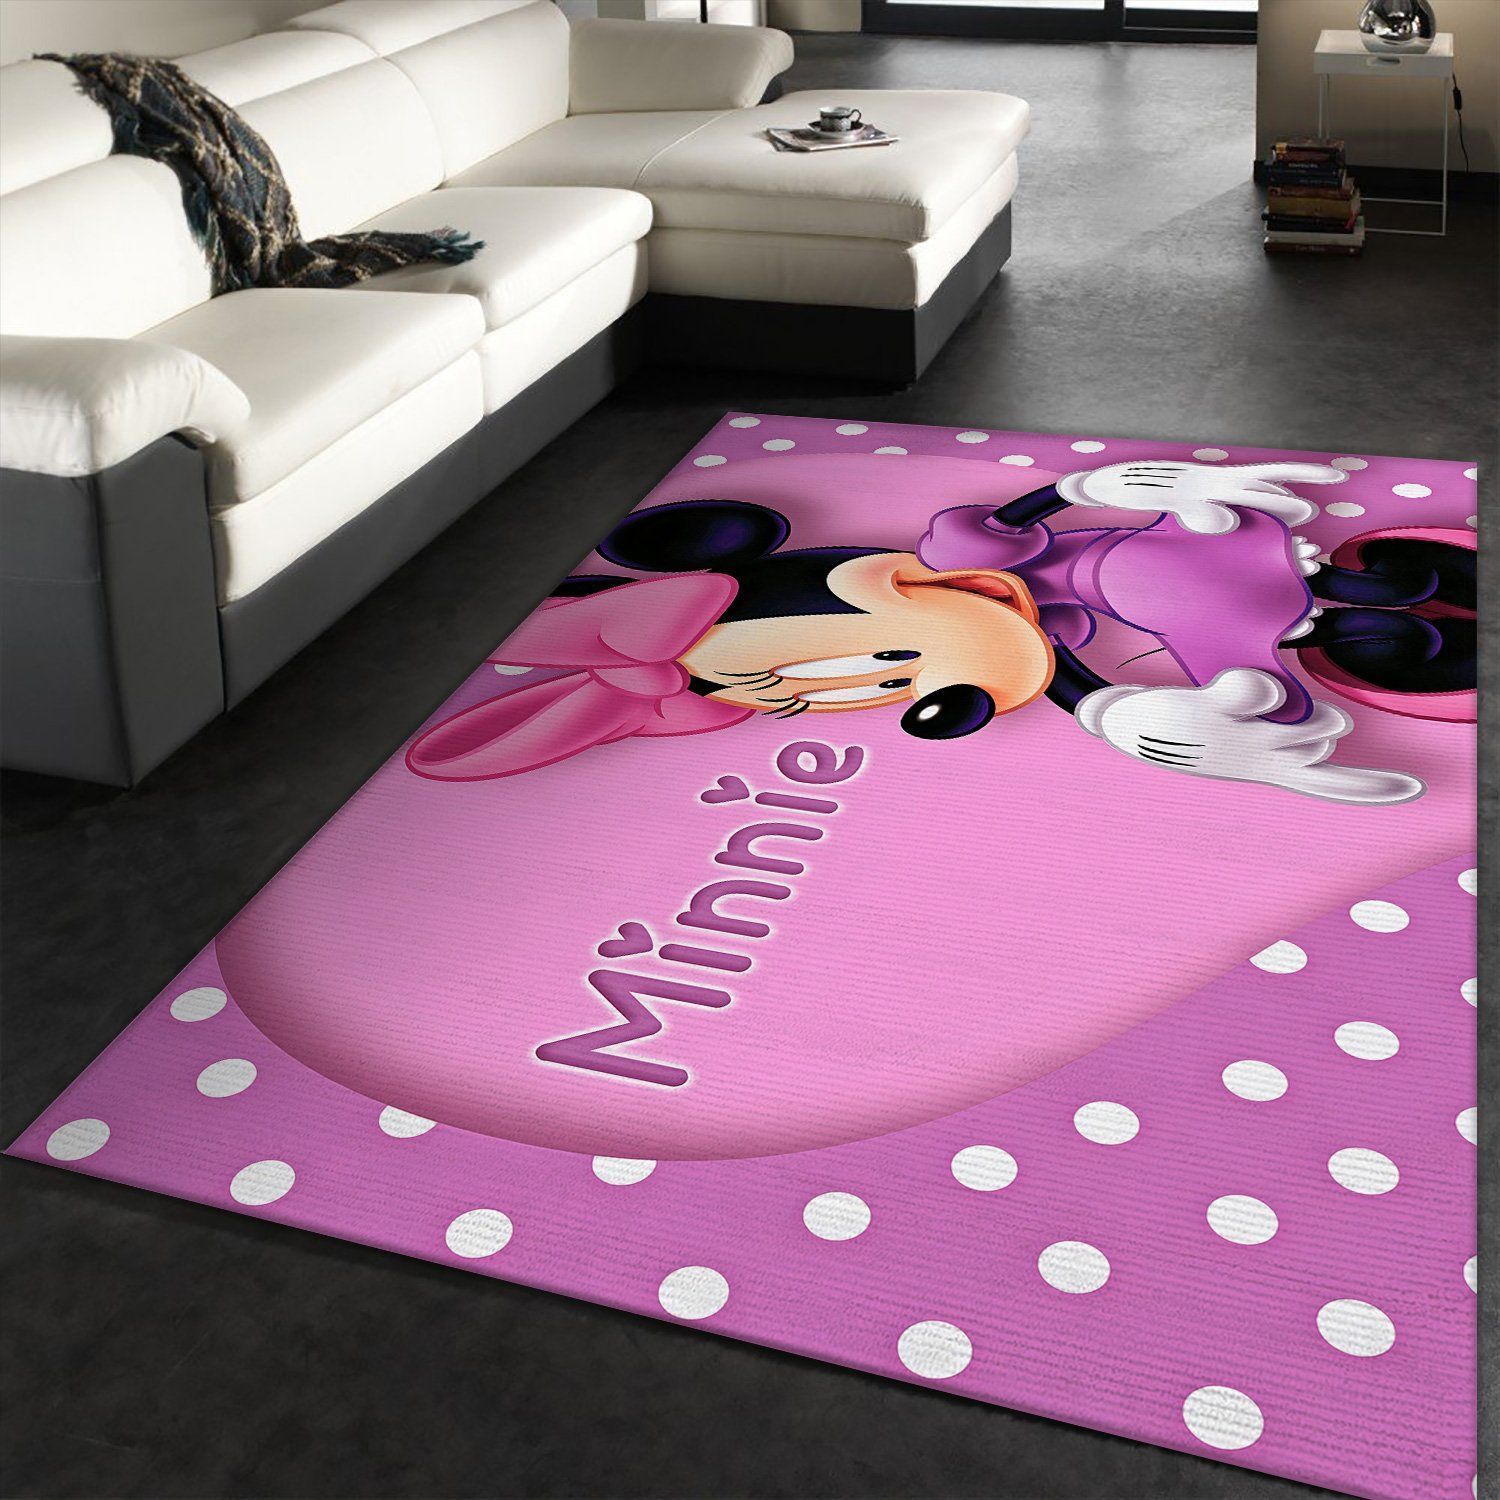 Minnie Mouse Area Rugs Disney Movies Living Room Carpet FN121207 Local Brands Floor Decor The US Decor - Indoor Outdoor Rugs